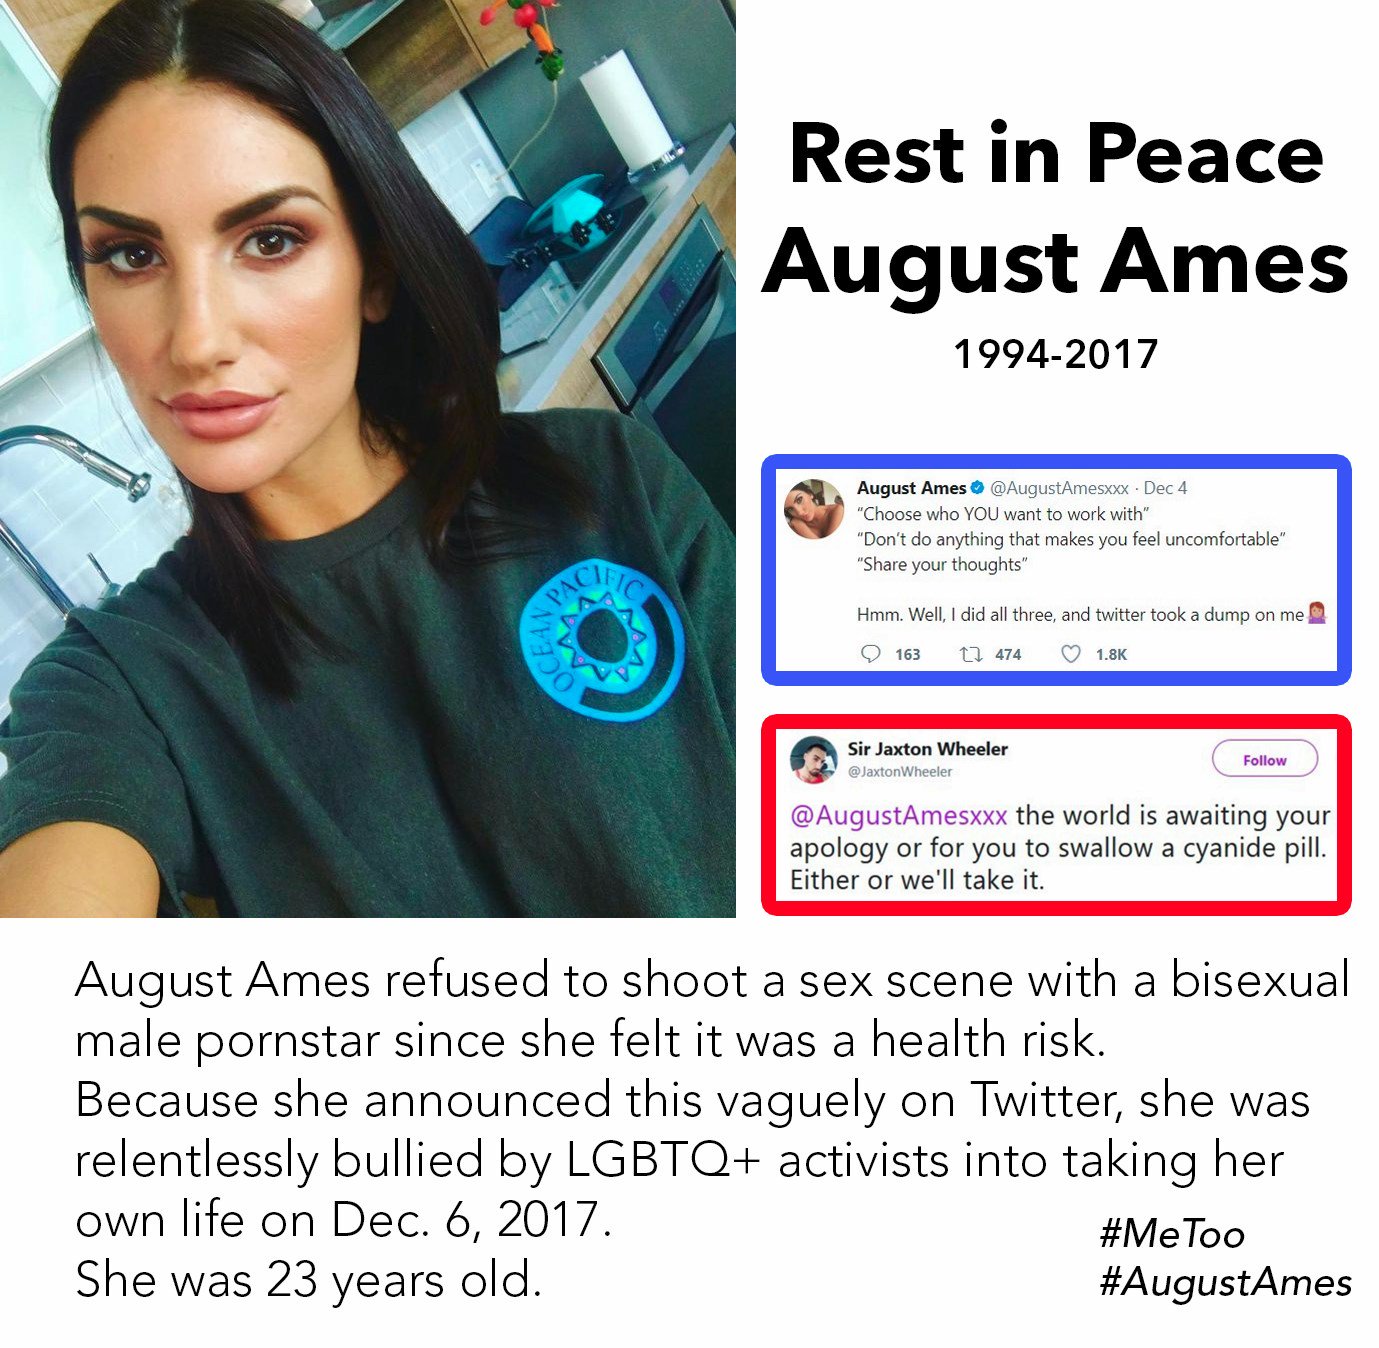 You are responsible of August Ames death. 